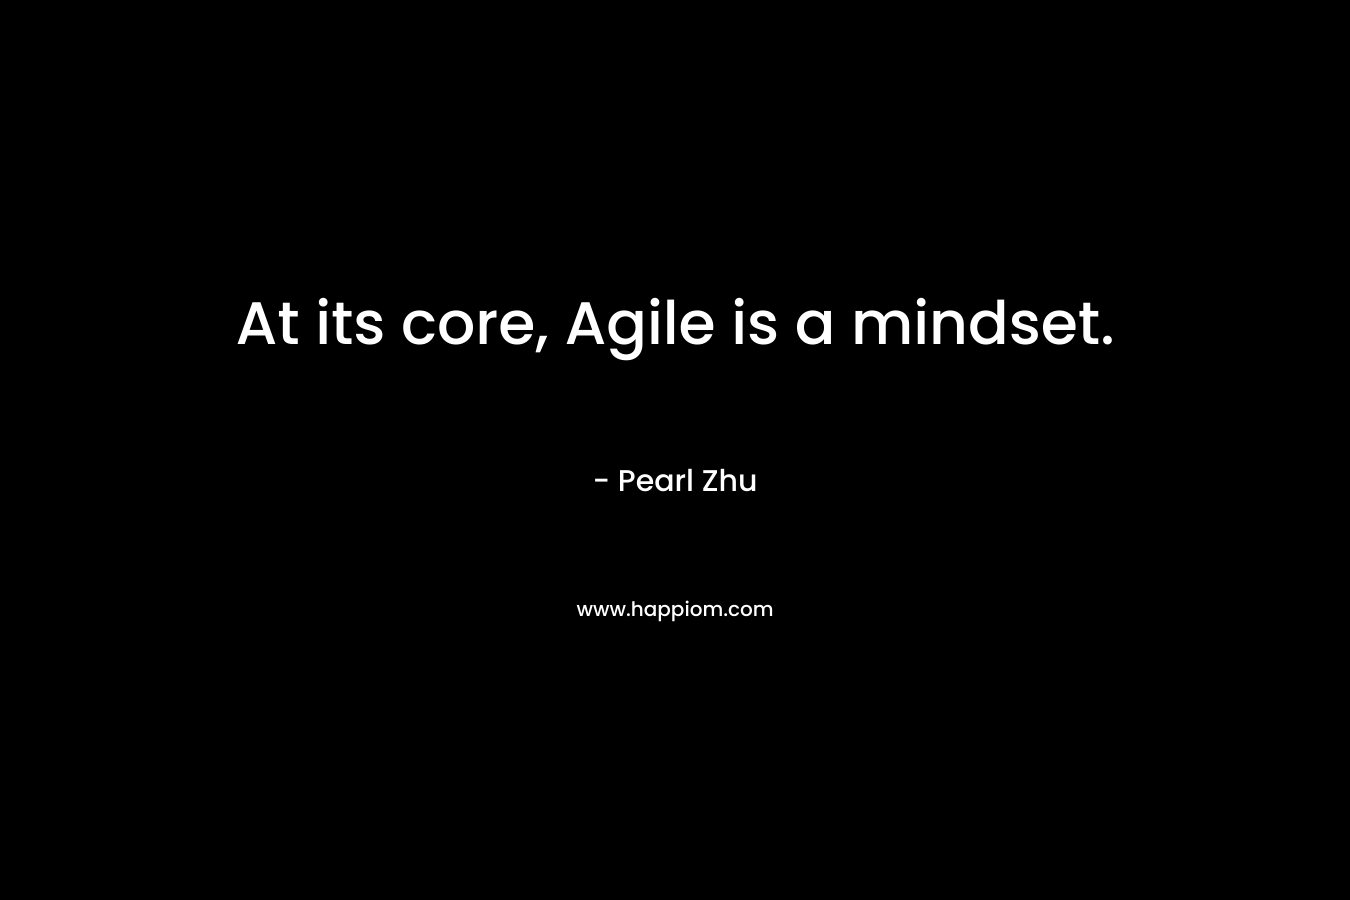 At its core, Agile is a mindset.